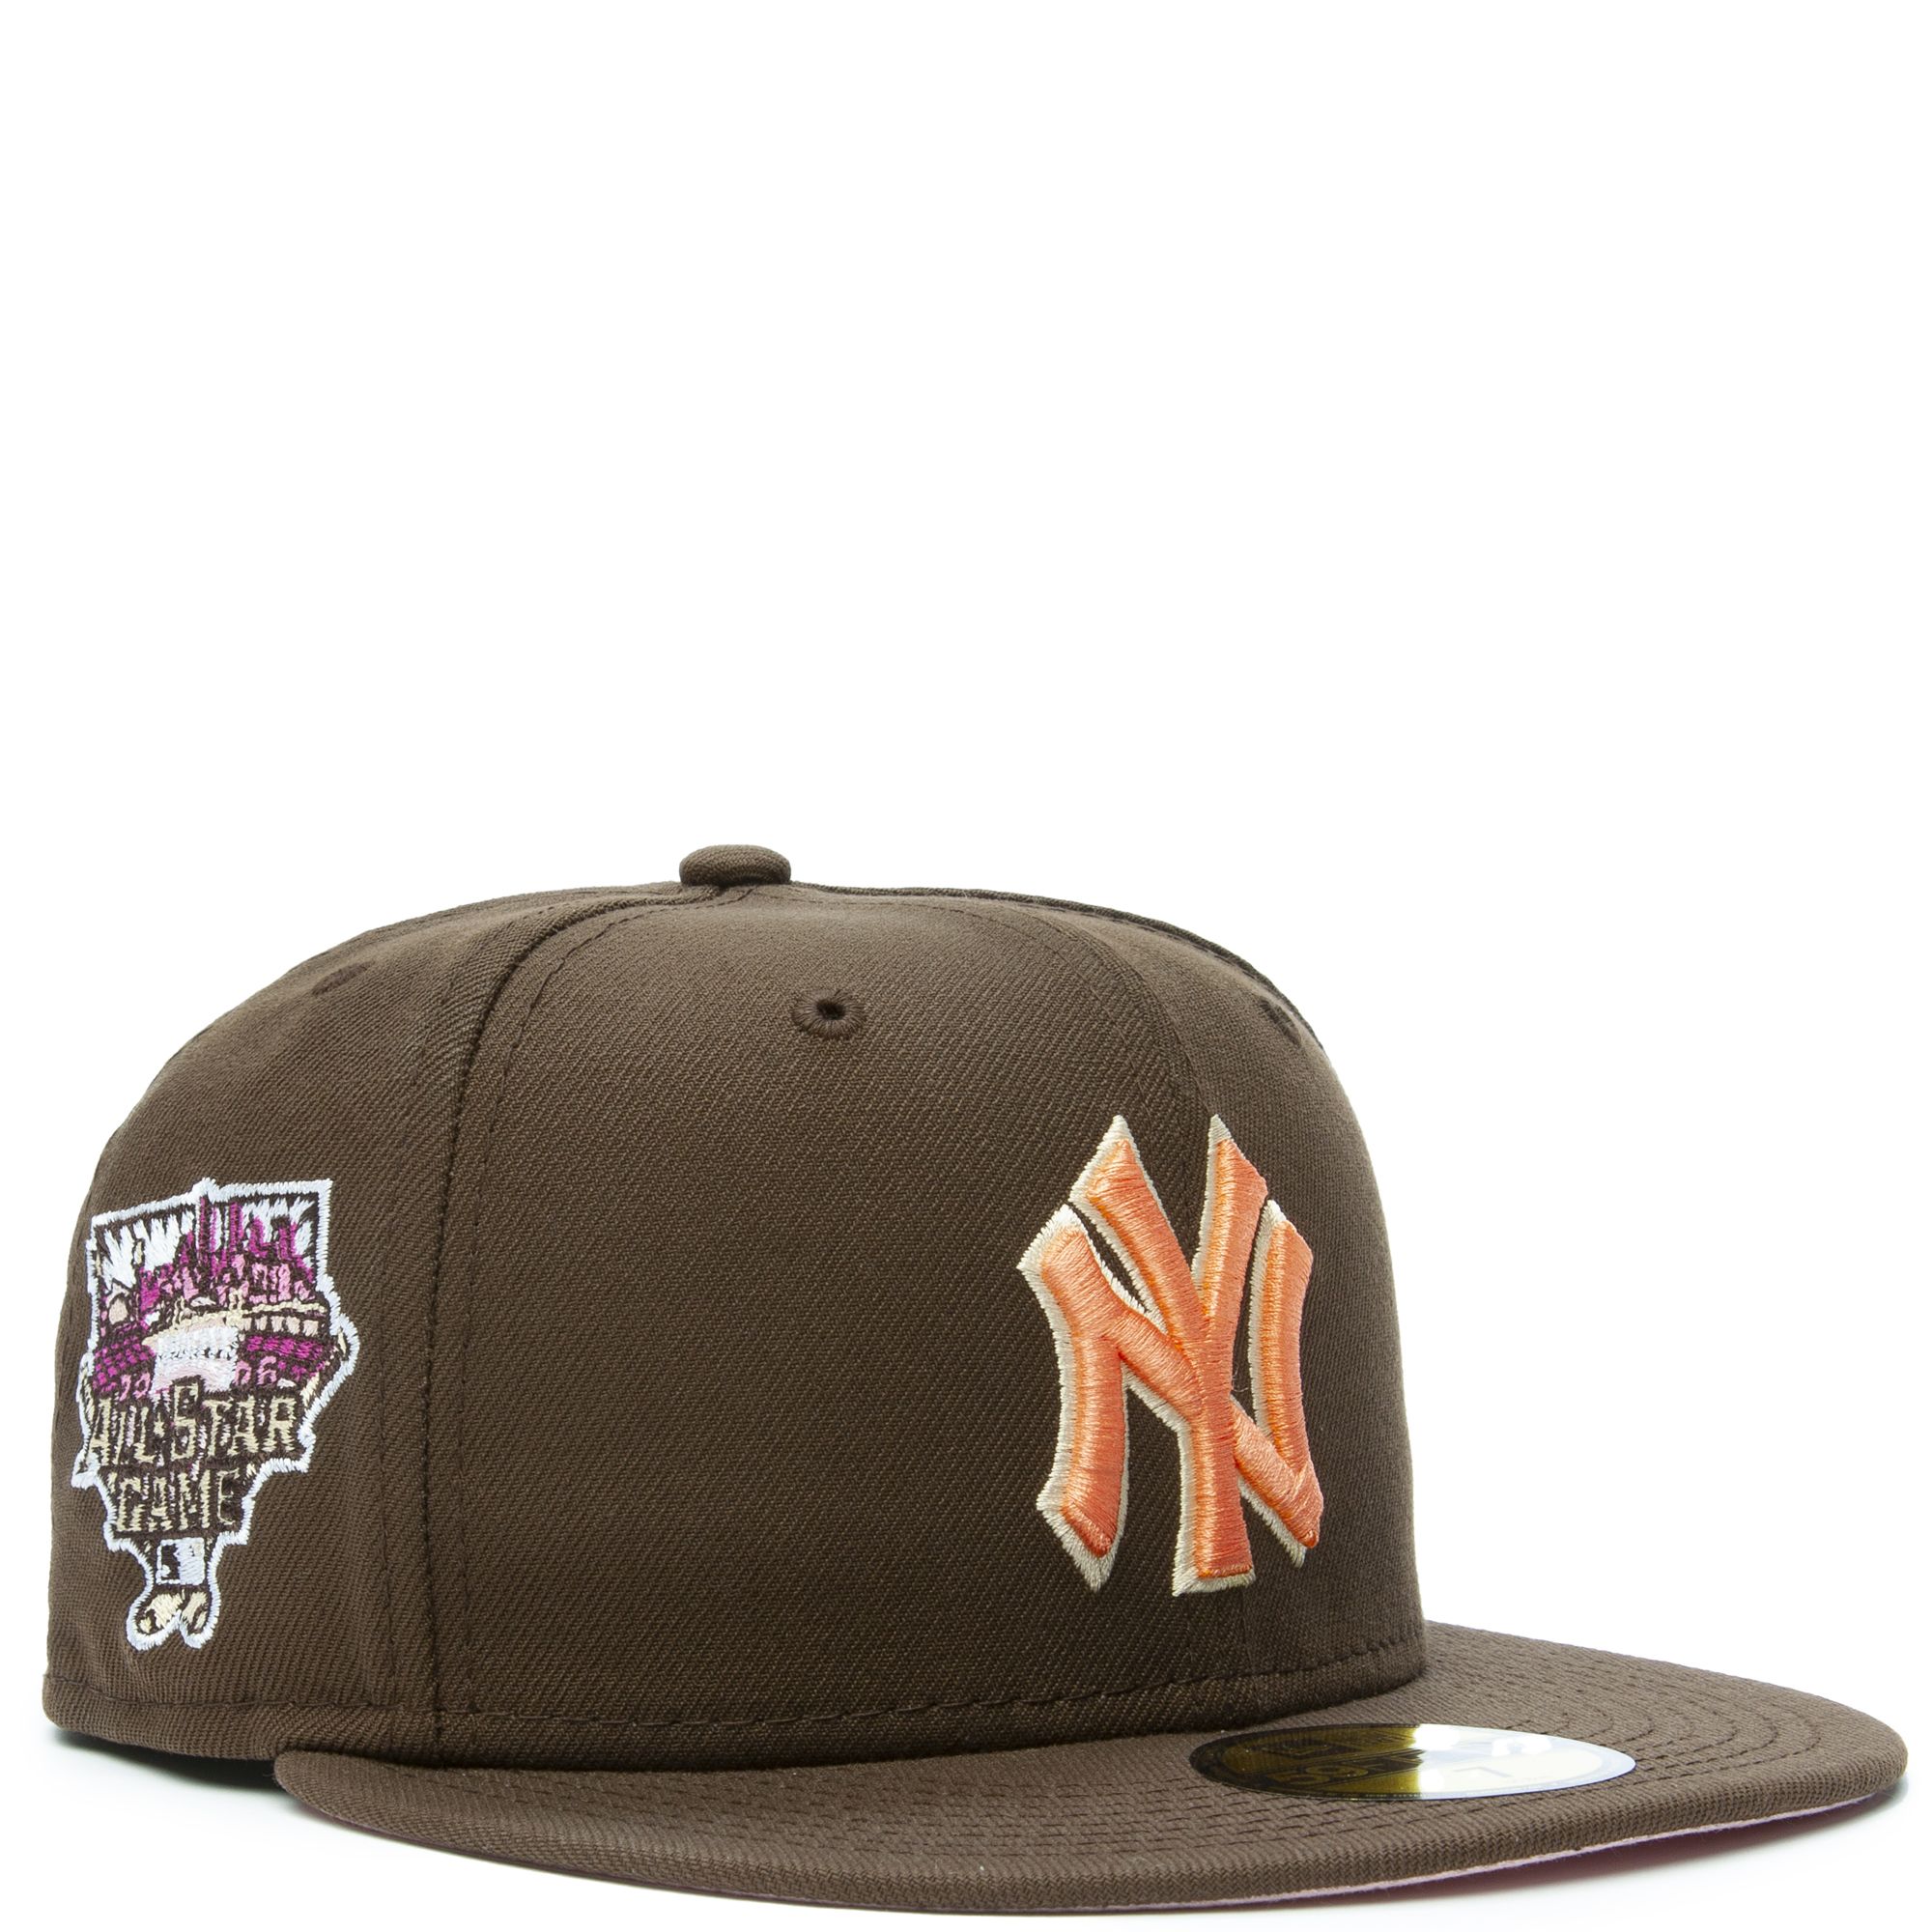 NY World Series Snapback (Brown/Pink) - ALMOST SOMEDAY